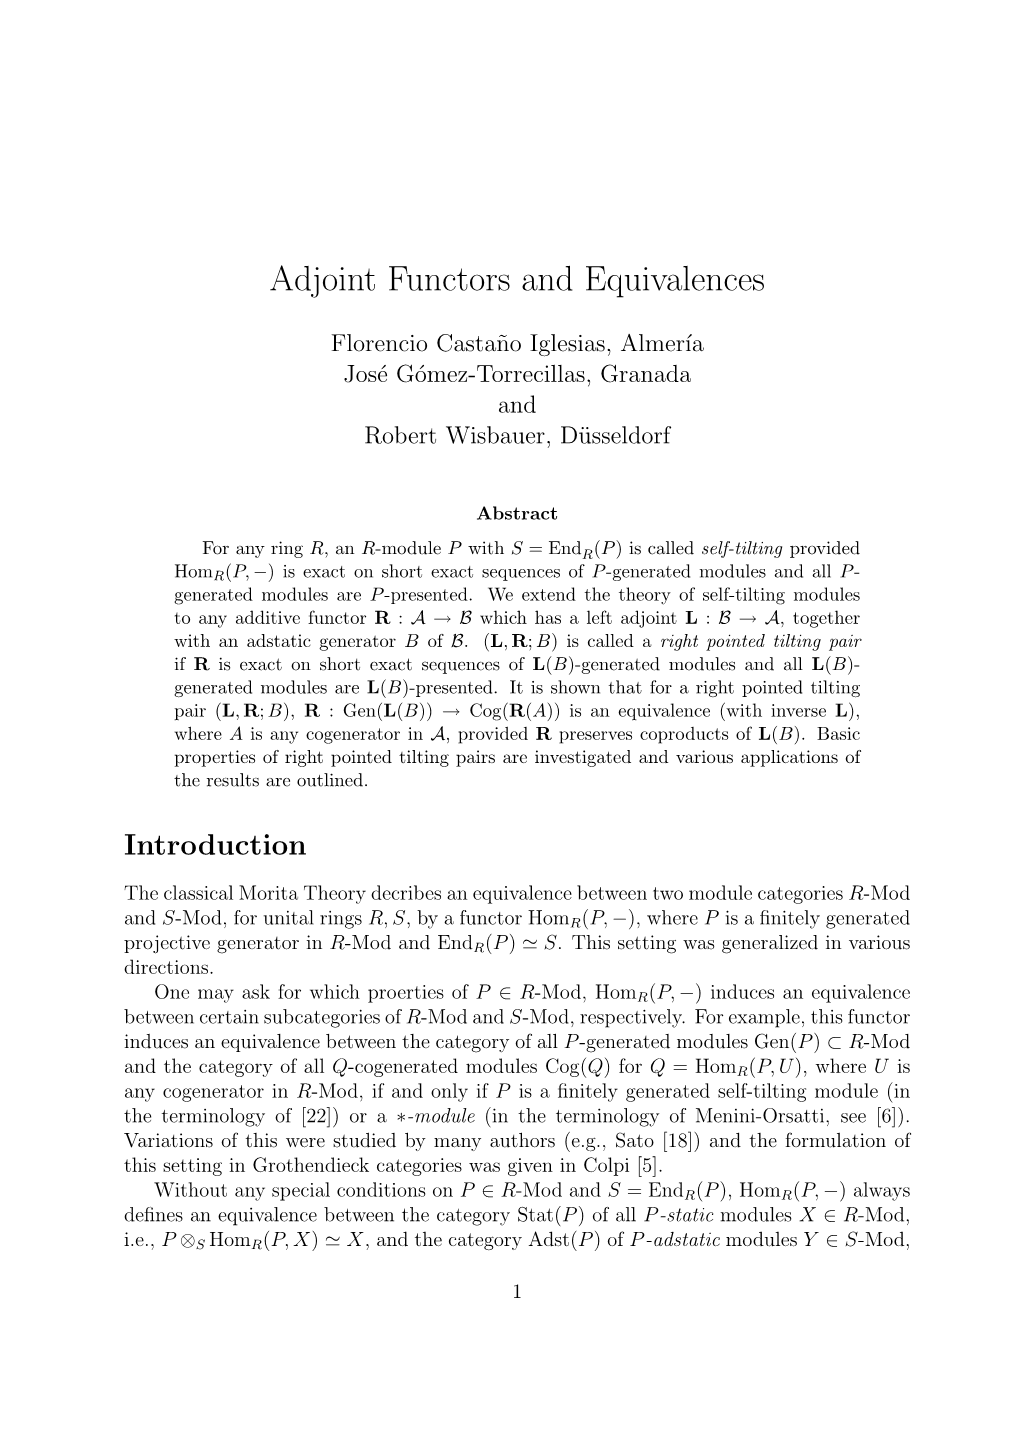 Adjoint Functors and Equivalences